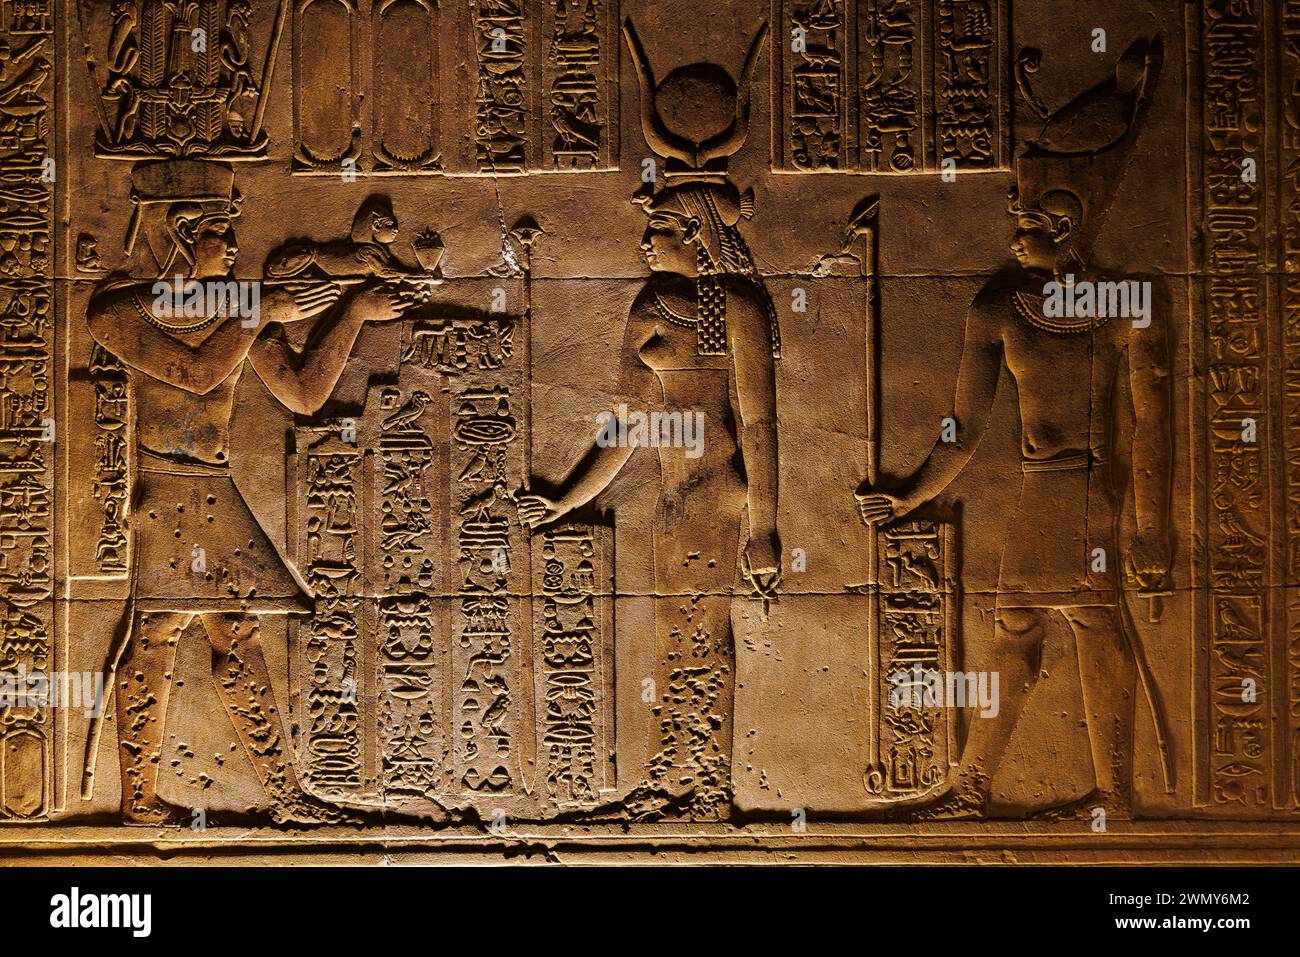 Egypt, Qena, Dendera, Pharaonic temples in Upper Egypt from the Ptolemaic and Roman periods listed as World Heritage by UNESCO, Hathor Temple, low relief Stock Photo